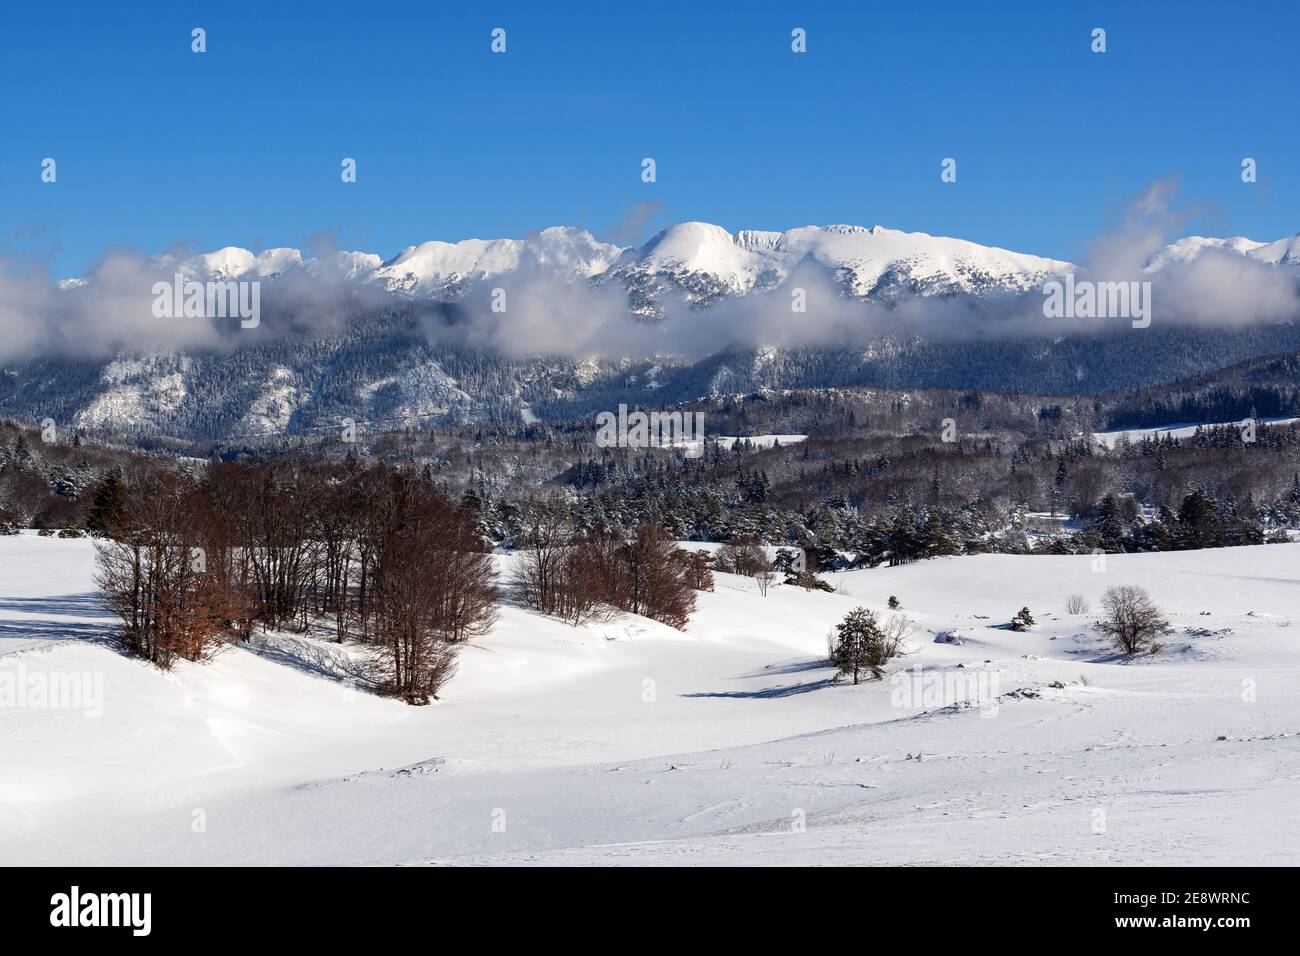 French winter landscapes. Panoramic view of mountain peaks and canyons. Vercors Regional Natural Park. Stock Photo